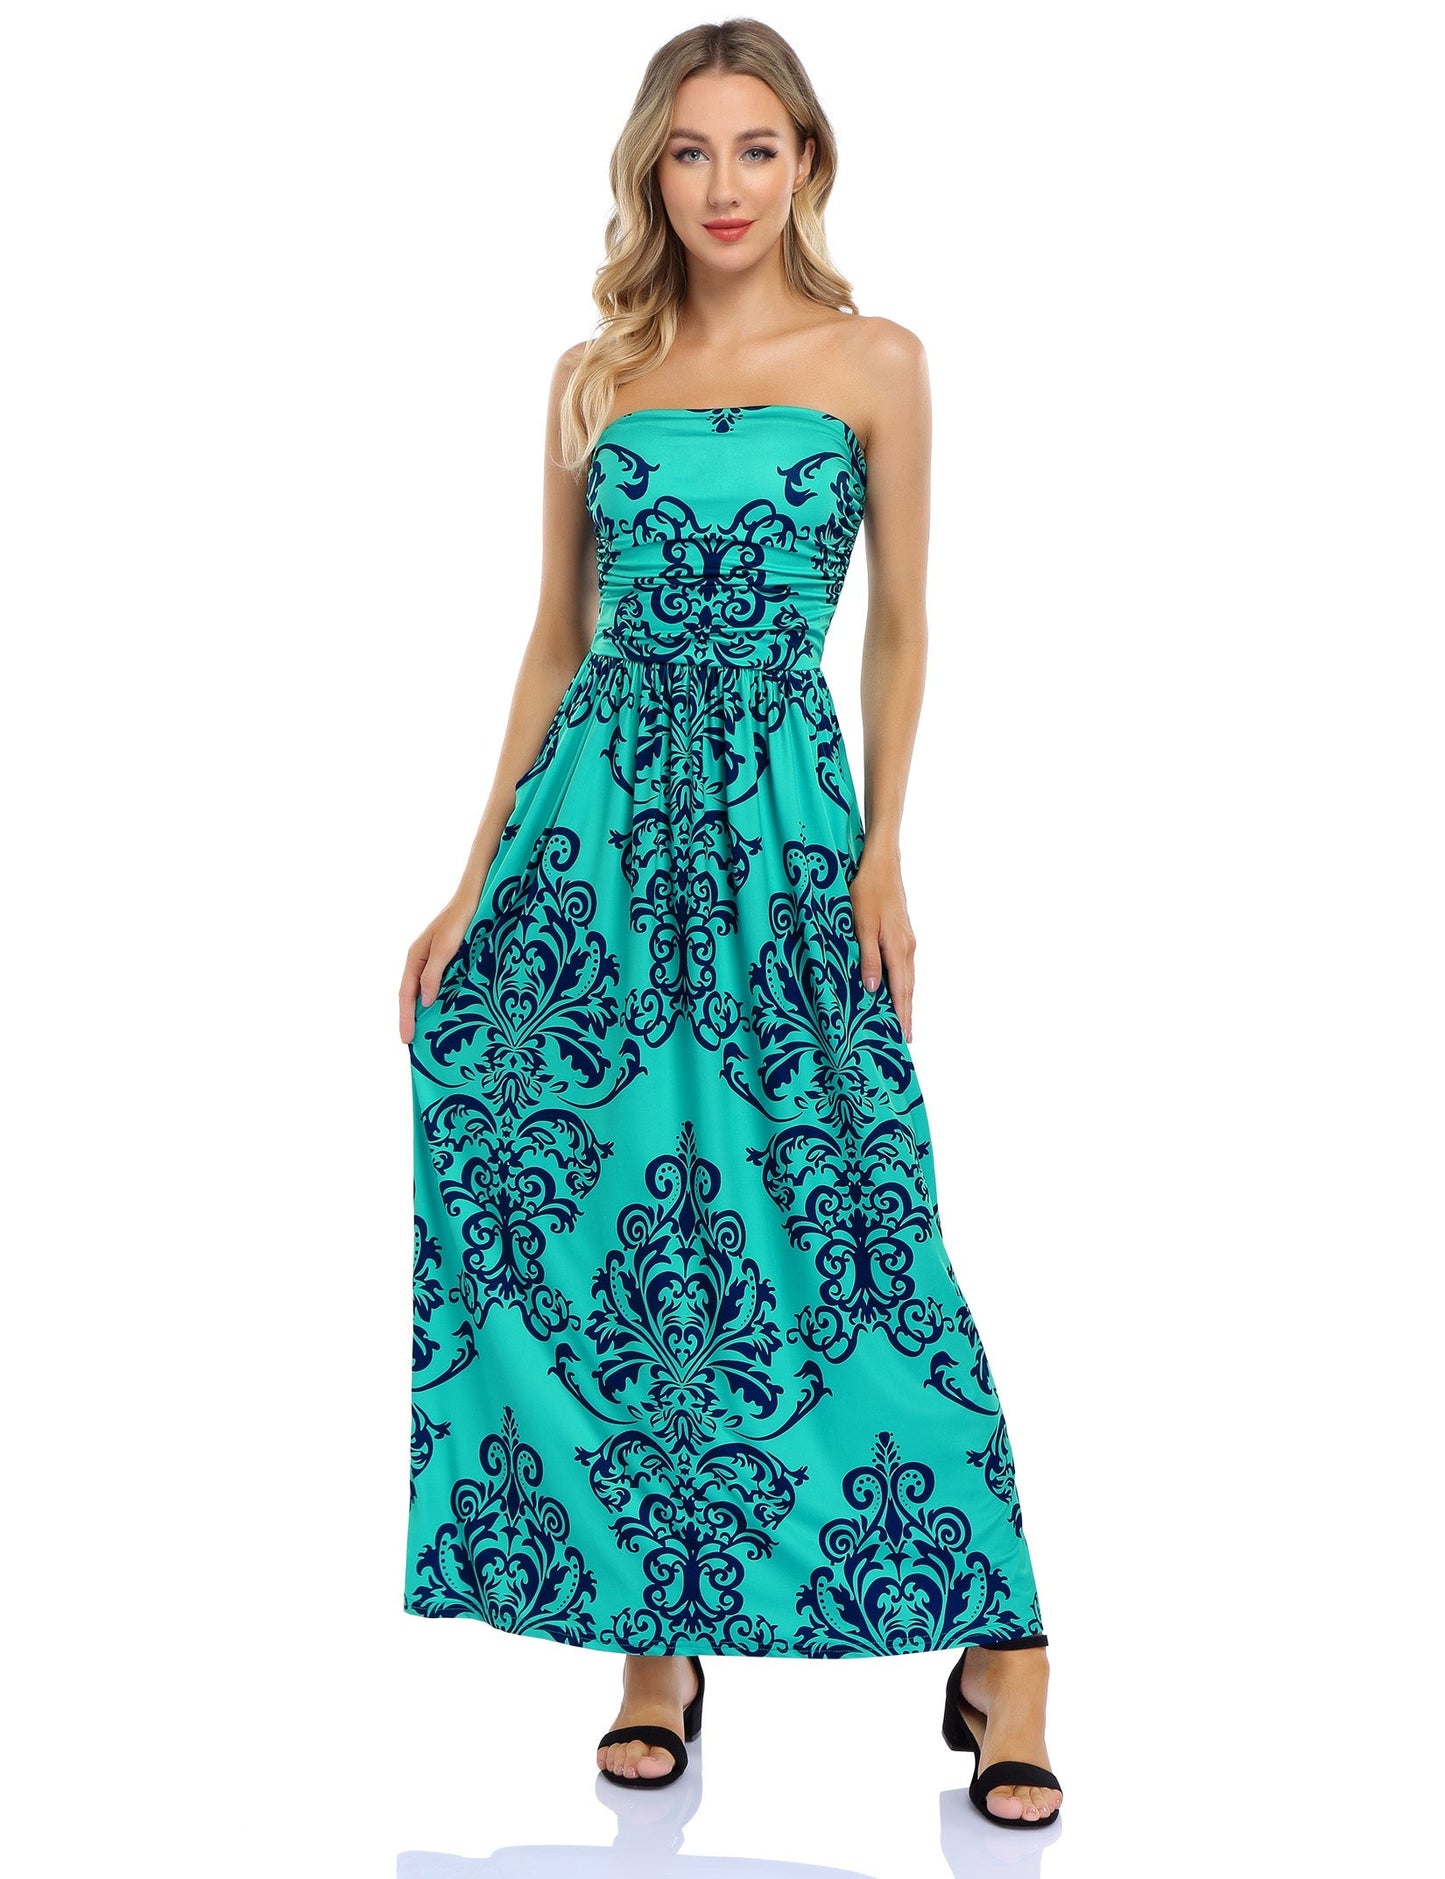 YESFASHION Women's Strapless Graceful Floral Party Maxi Long Dress Dark Blue